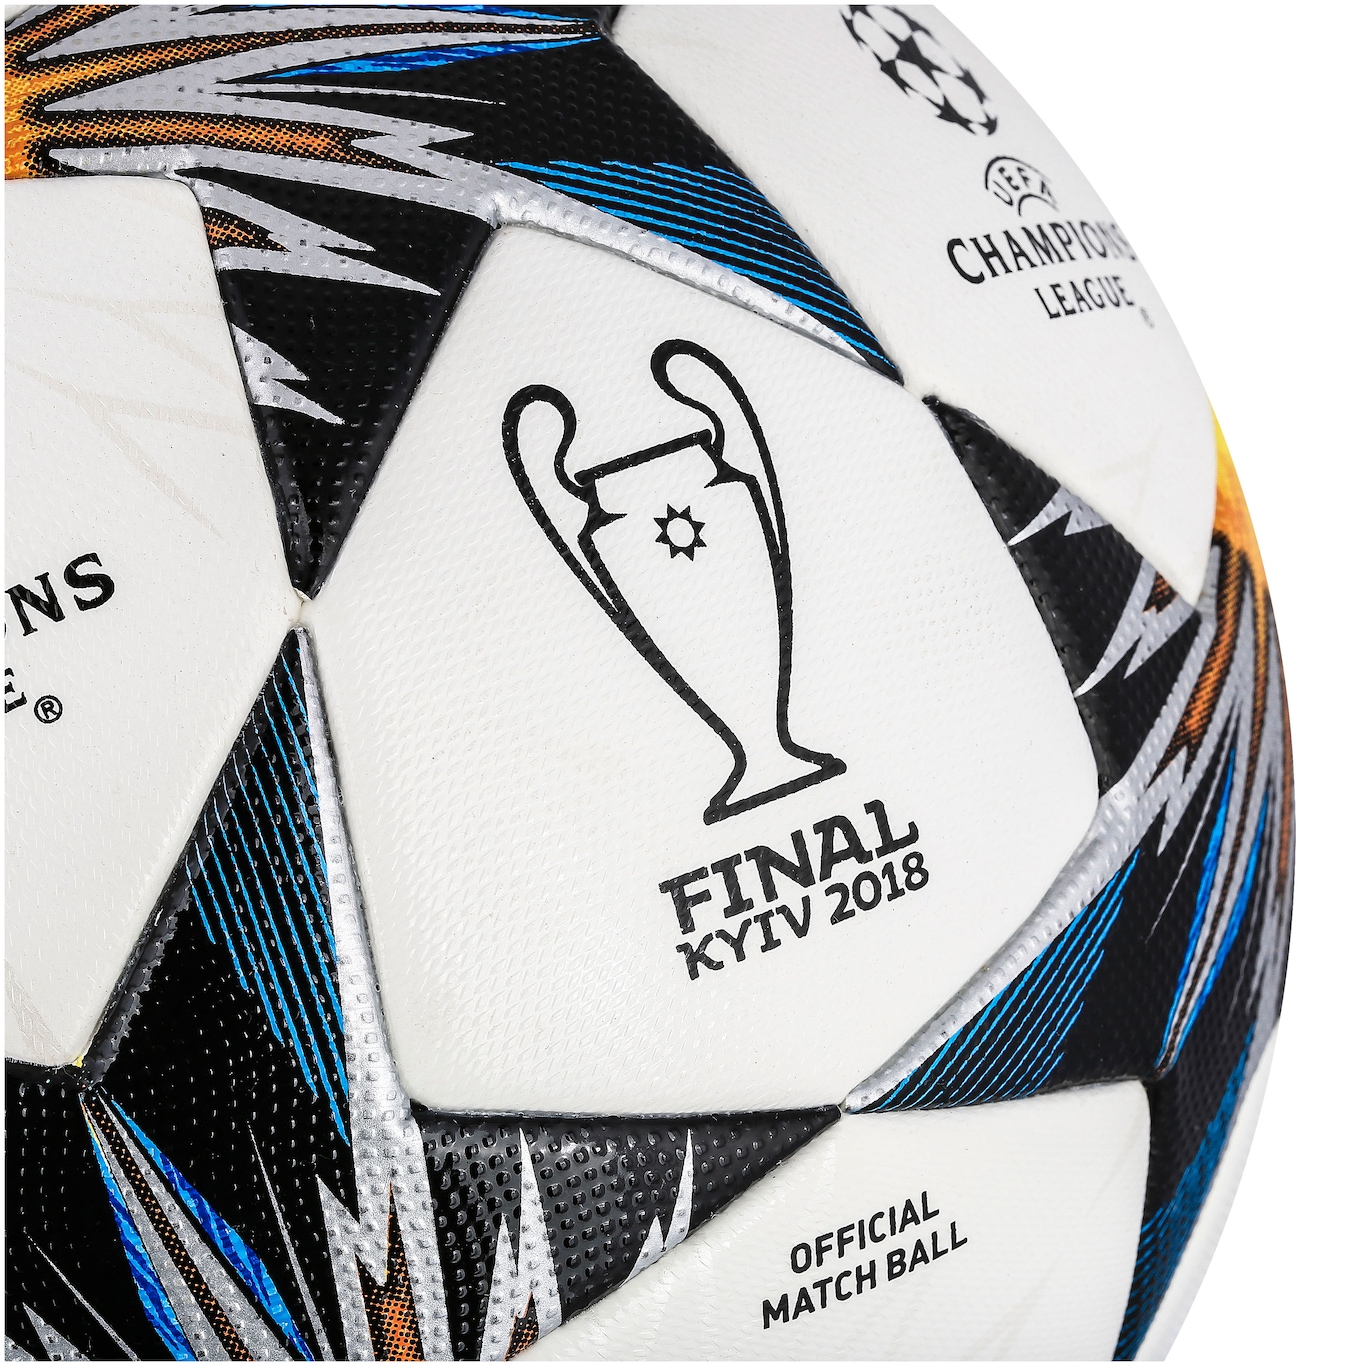 Adidas Finale Kyiv is official final match ball of Champions